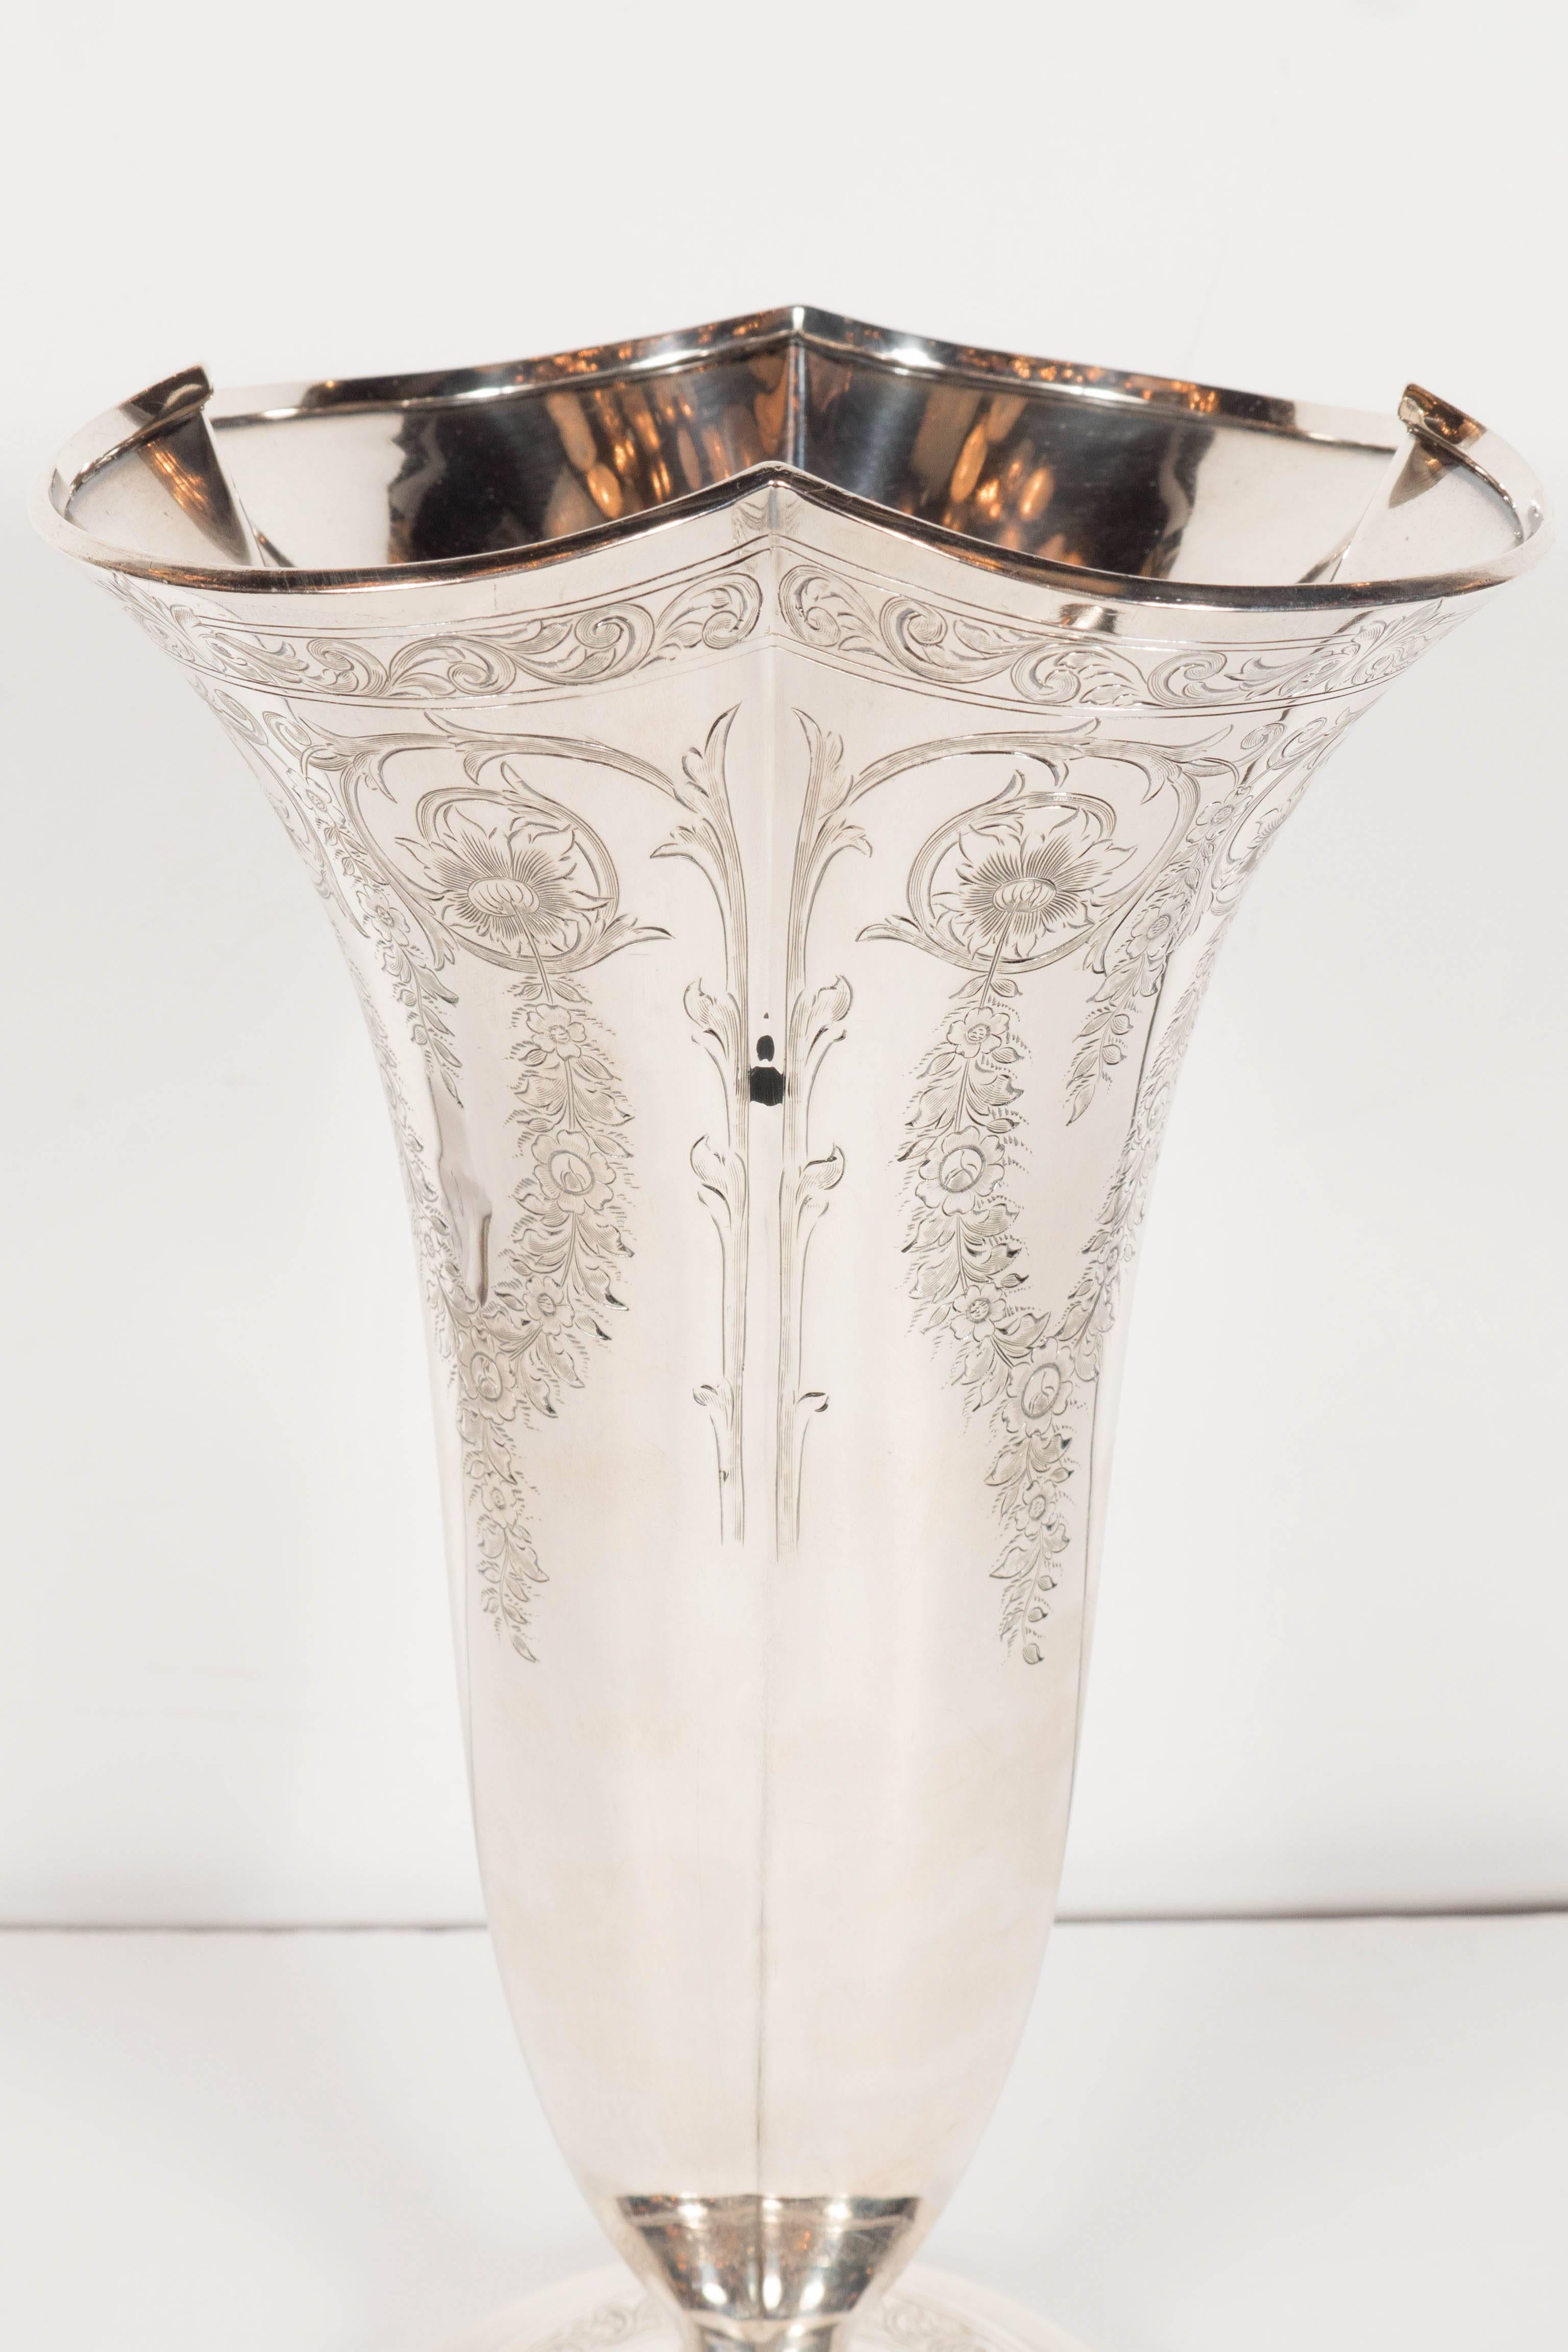 This impressive and hefty trumpet vase was crafted at the turn of the 20th century in sterling silver by Howard and Company. It is a fine example from famed Howard & Co., which was among New York City’s most renowned retail silversmiths’